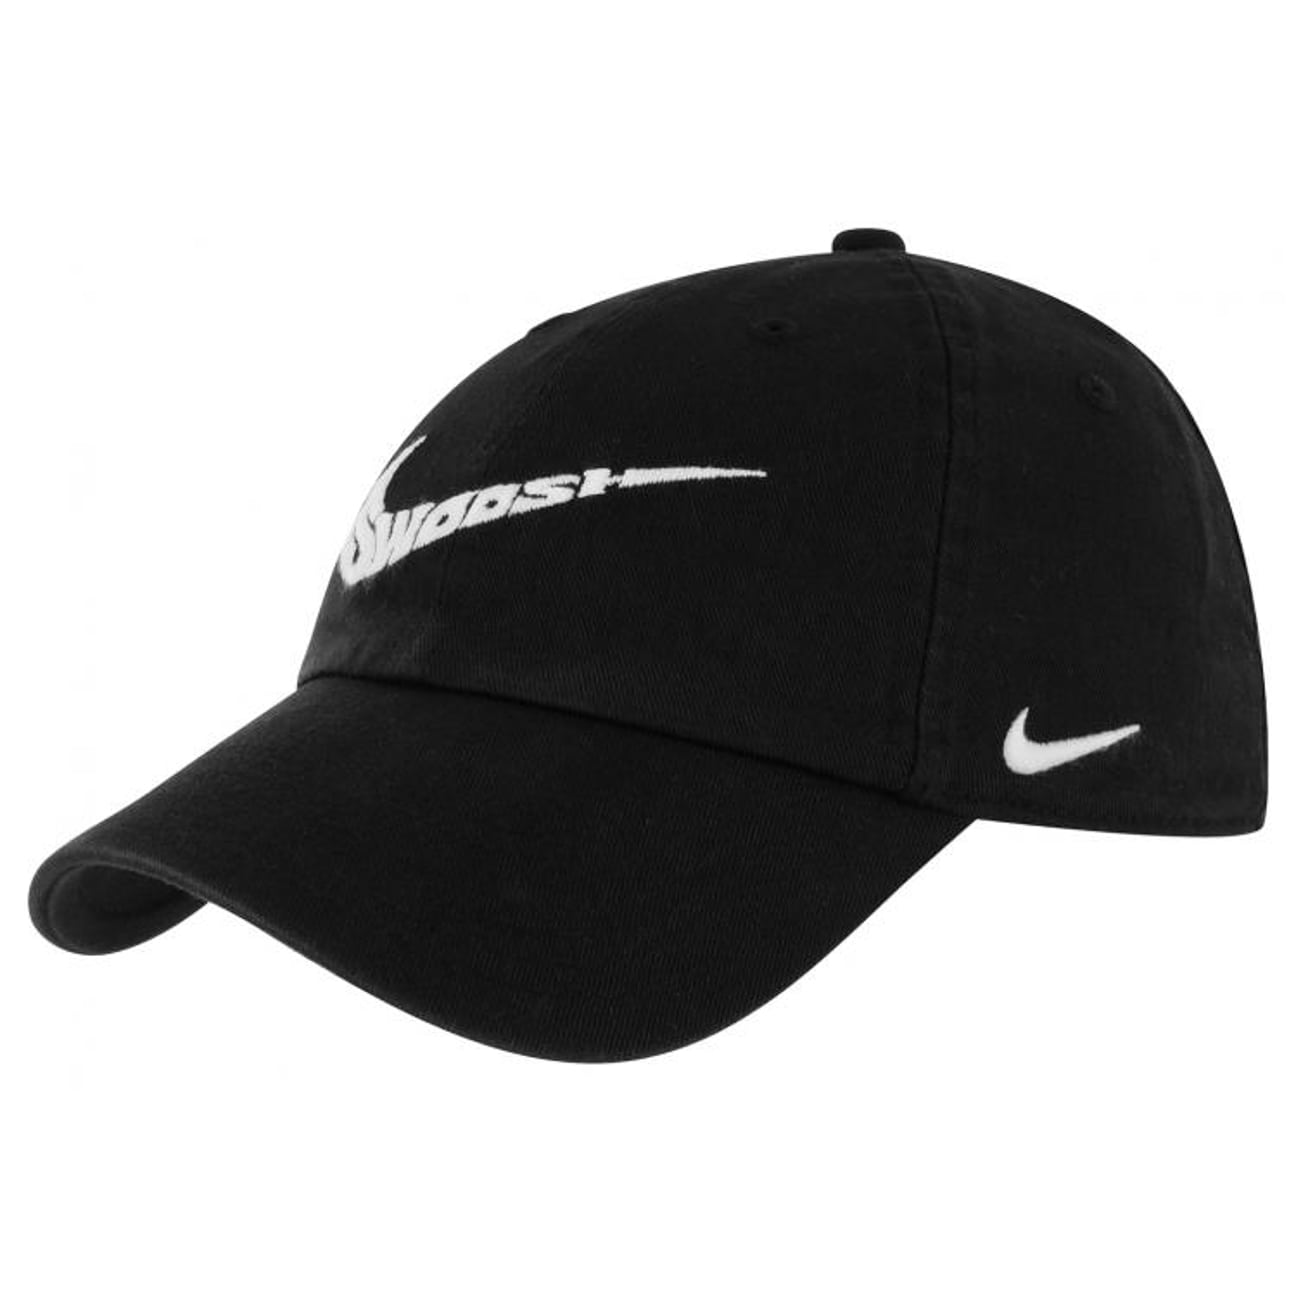 Filled Swoosh Cap for Women by Nike, EUR 9,95 --> Hats, caps & beanies ...